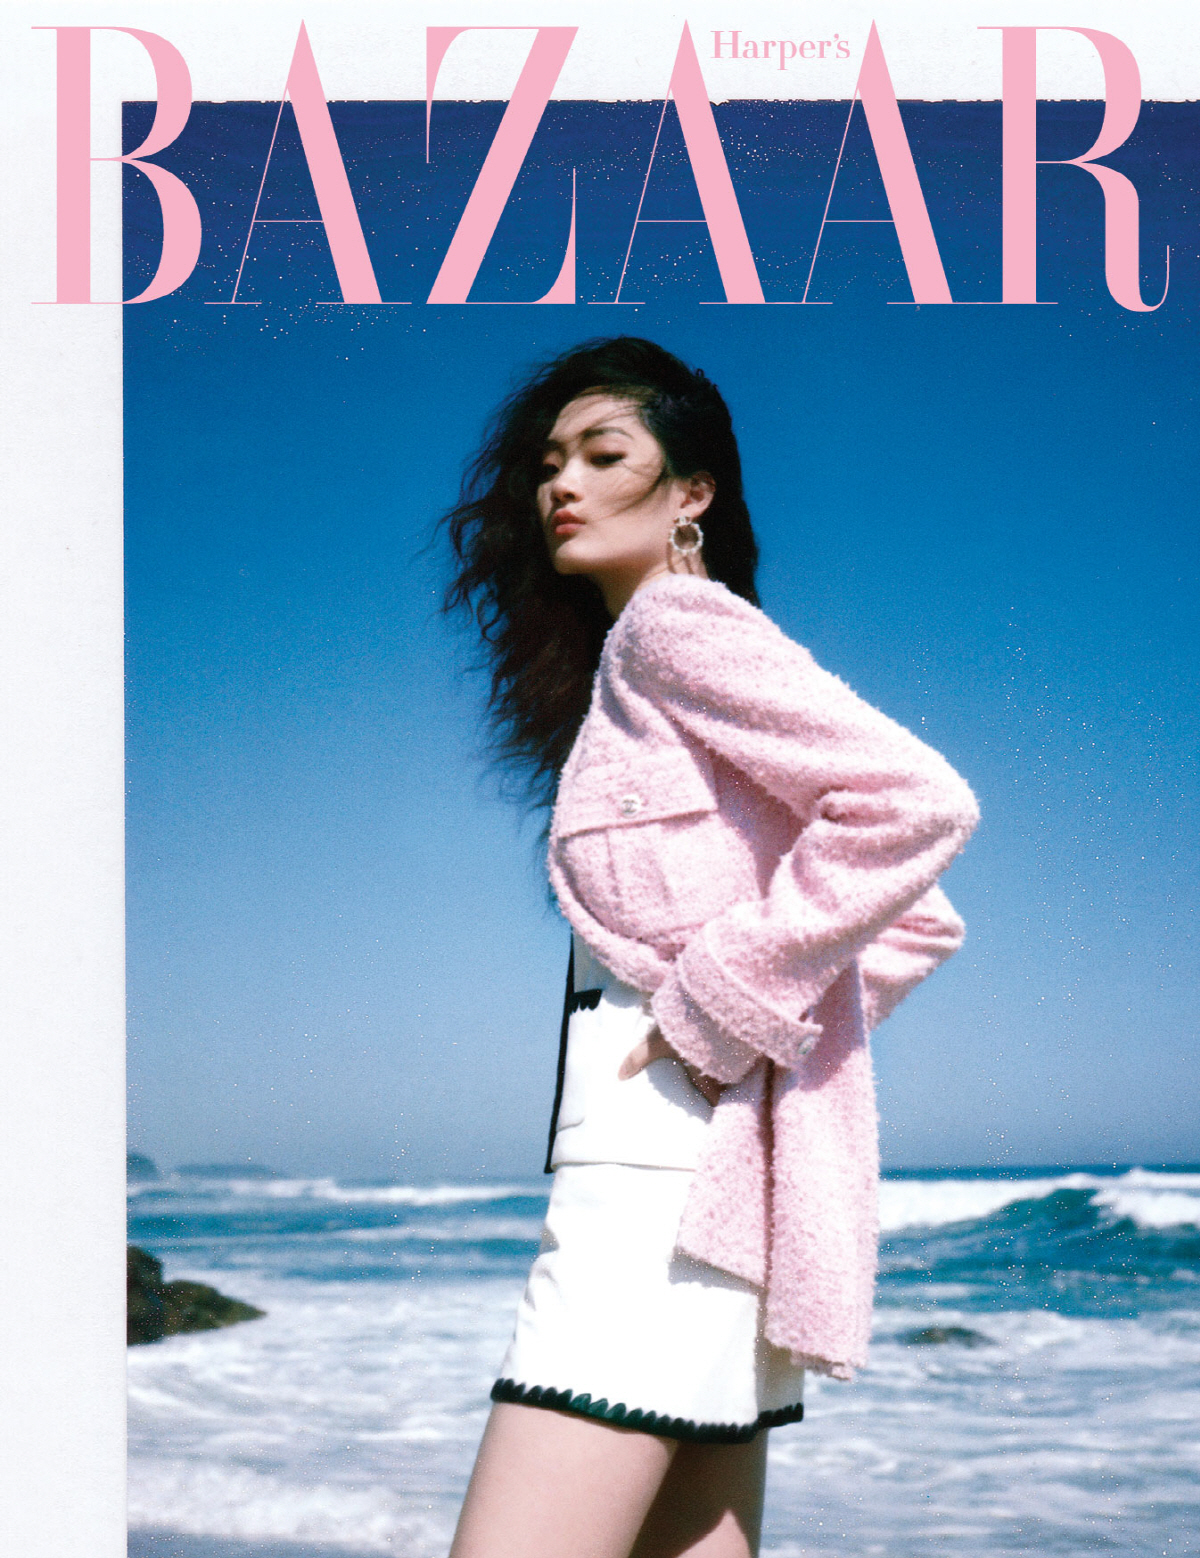 Fashion magazine Harpers Bazaar has released a fashion picture with top model Shin Hyunji.Last spring, the top model Shin Hyun-ji, who was in the finale of the 2020 F/W Chanel collection in Paris, France, and gathered topics with Asias first closing model, was the main character.It is a World Model that has a special relationship with Chanel House from Carl Lagerfeld to designer Virginia Biaar who leads Chanel now.She appeared as a cover girl in a newly released 2020 cruise collection.If Carl showed an overwhelming stage overflowing with imagination and creativity, now Chanel House, led by Virginia, showcases the style that contemporary women want and need.She has been a model since high school, and she has been mature and charismatic through this Bazaar cover shoot.Not only did it penetrate perfectly with vintage sensibility works that were shot only with film and polaroids, not digital!Im going to be the first to wear clothes Ill never wear in my life, and Ill be on the runway perfectly decorated, and I cant say all the joy of getting that spotlight.I think the power of fashion is similar, because it plays a role in representing and expressing the times and society. The fashion picture with Shin Hyunji and Chanel can be found in the November issue of Harpers Bazaar, website and Instagram.Meanwhile, Shin Hyun-ji, who was born in 1996, won the on-style Challenge Super Model Korea season 4 in 2013.He also attracted attention by boasting friendships with Song Hye-kyo, who surpassed the age of 15.